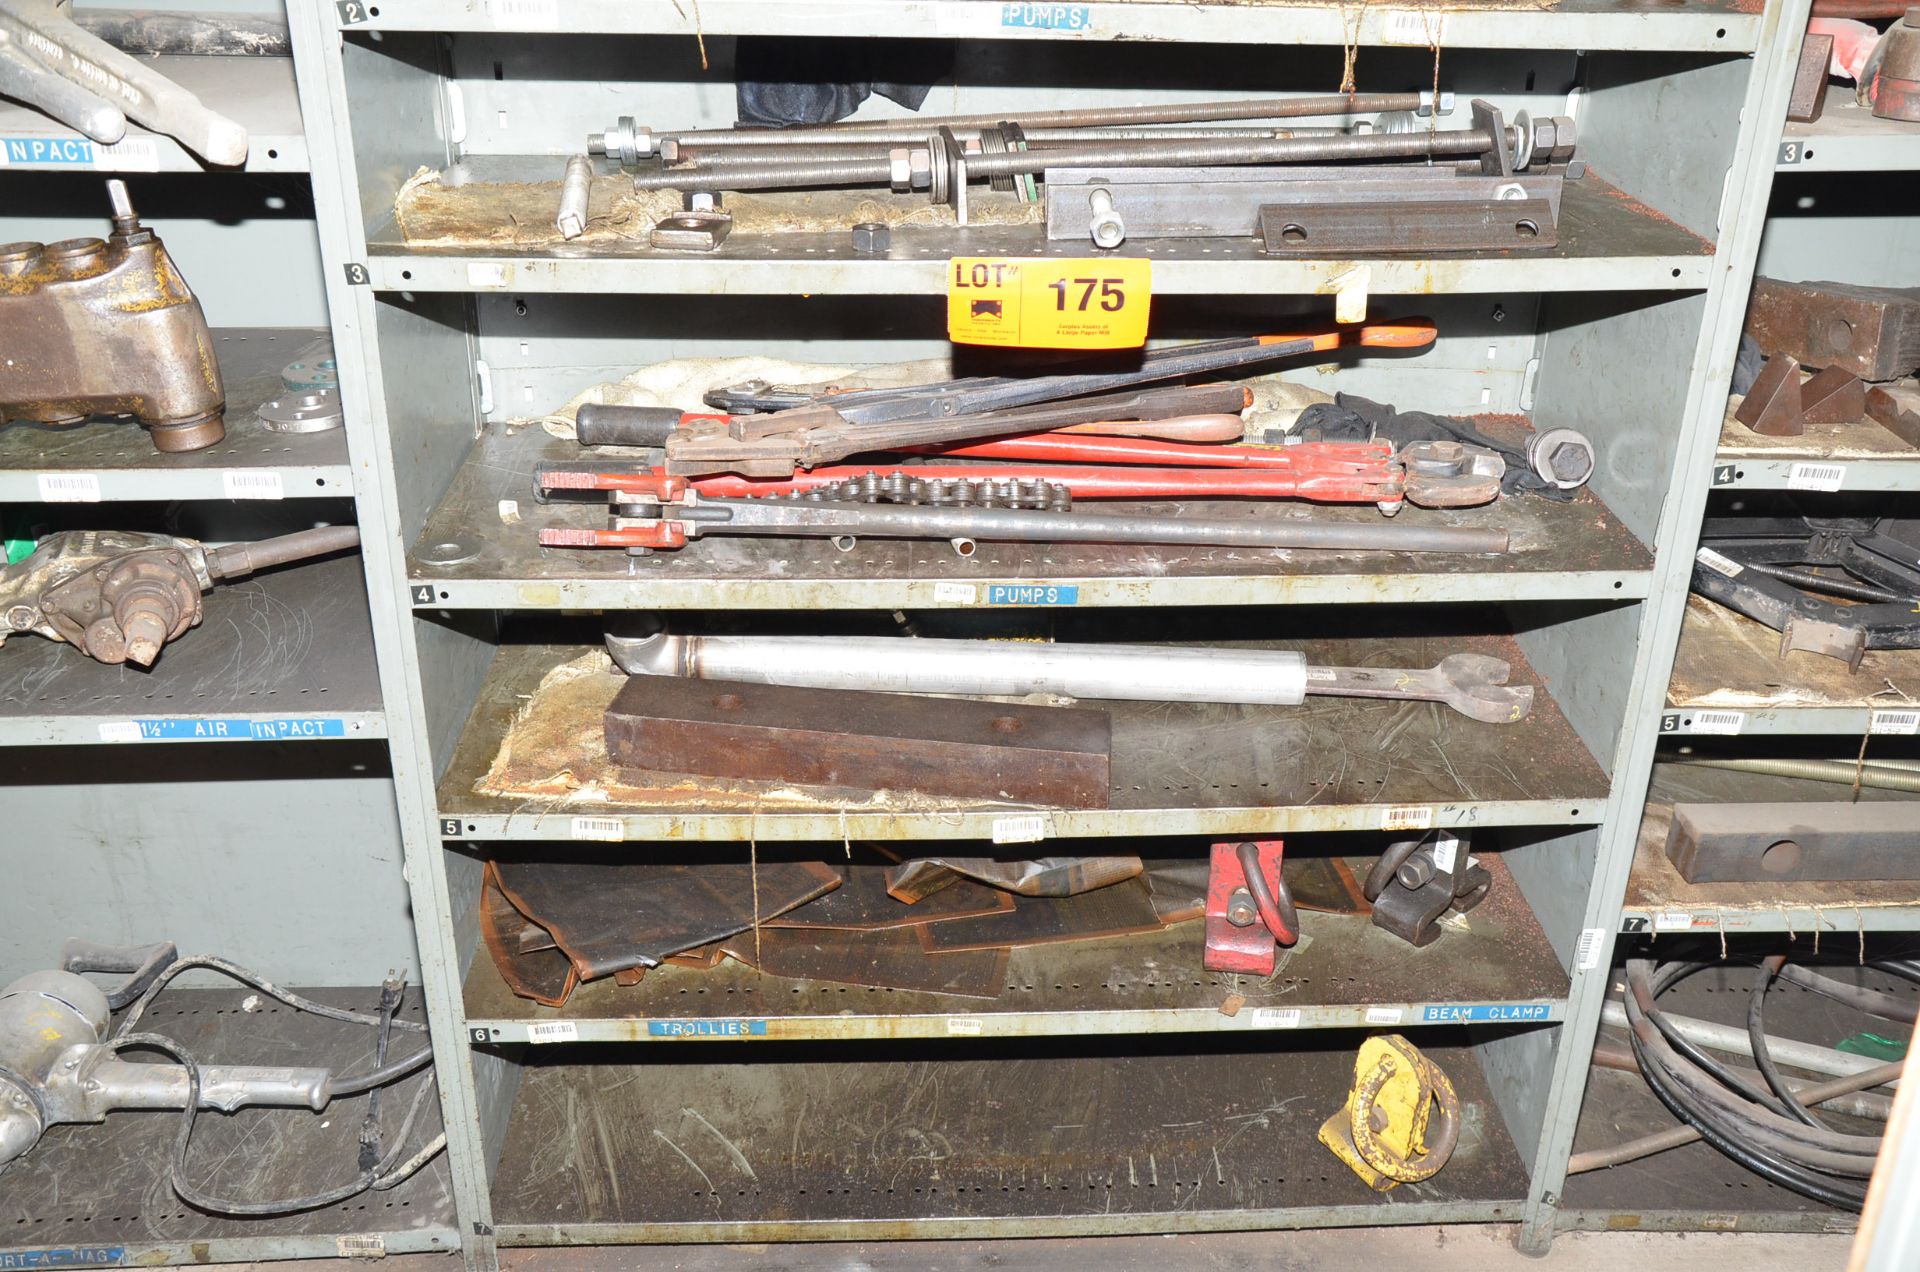 LOT/ CONTENTS OF SHELF - INCLUDING HYDRAULIC PUMPS, BOLT CUTTERS, STRAPPING TOOLS, PIPE CUTTERS [ - Image 3 of 3